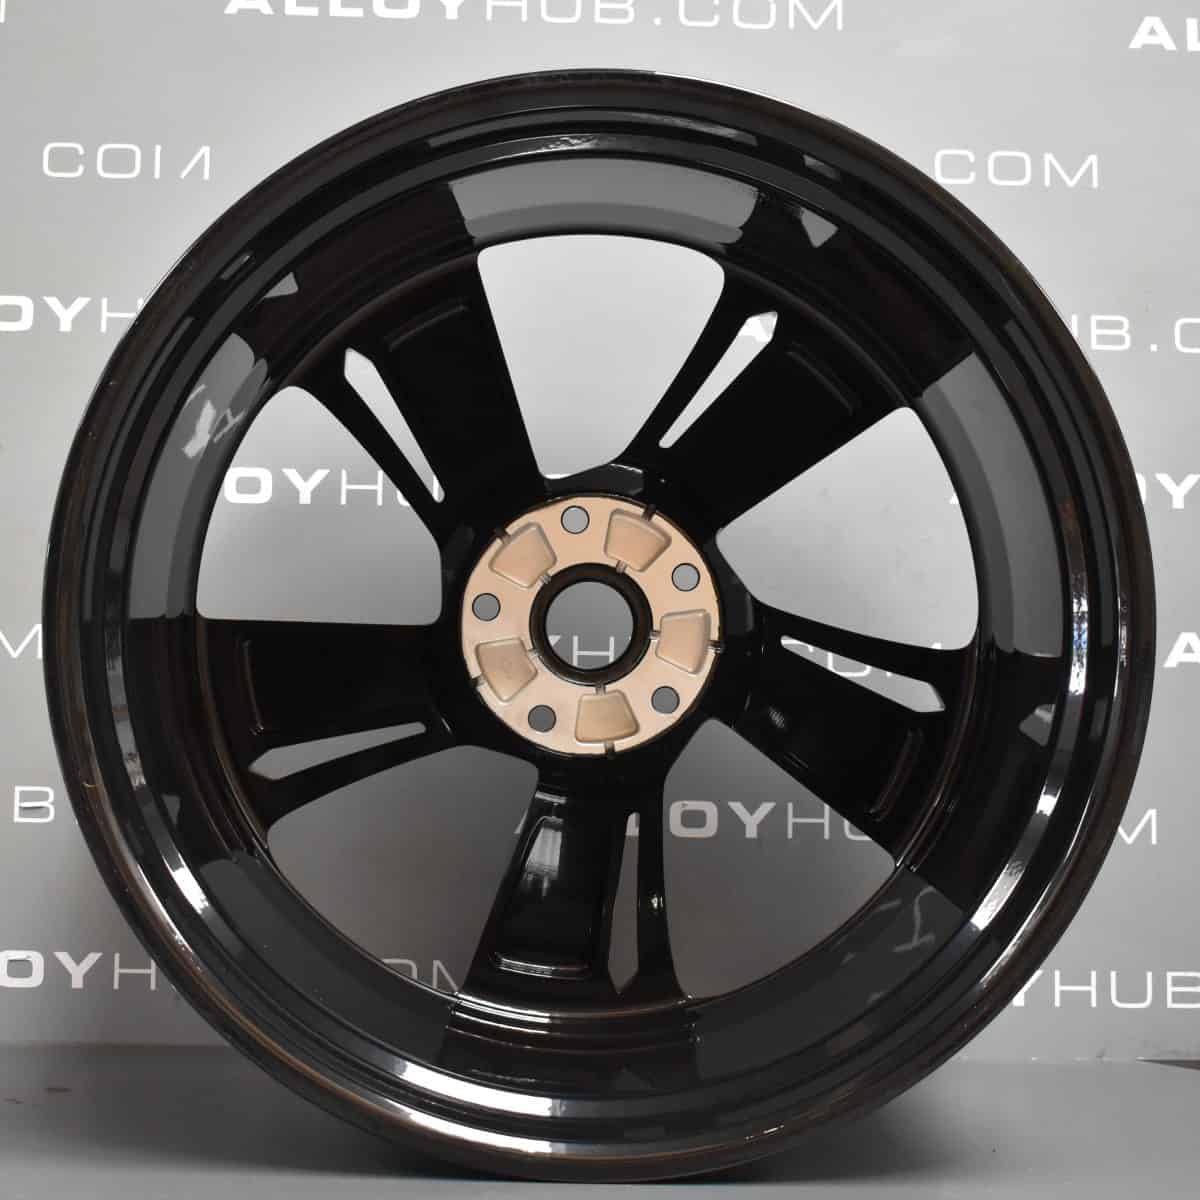 Genuine Bentley Bentayga 5 Spoke 22" Inch Alloy Wheels with Gloss Black Finish 3A601025D, 36A601025G